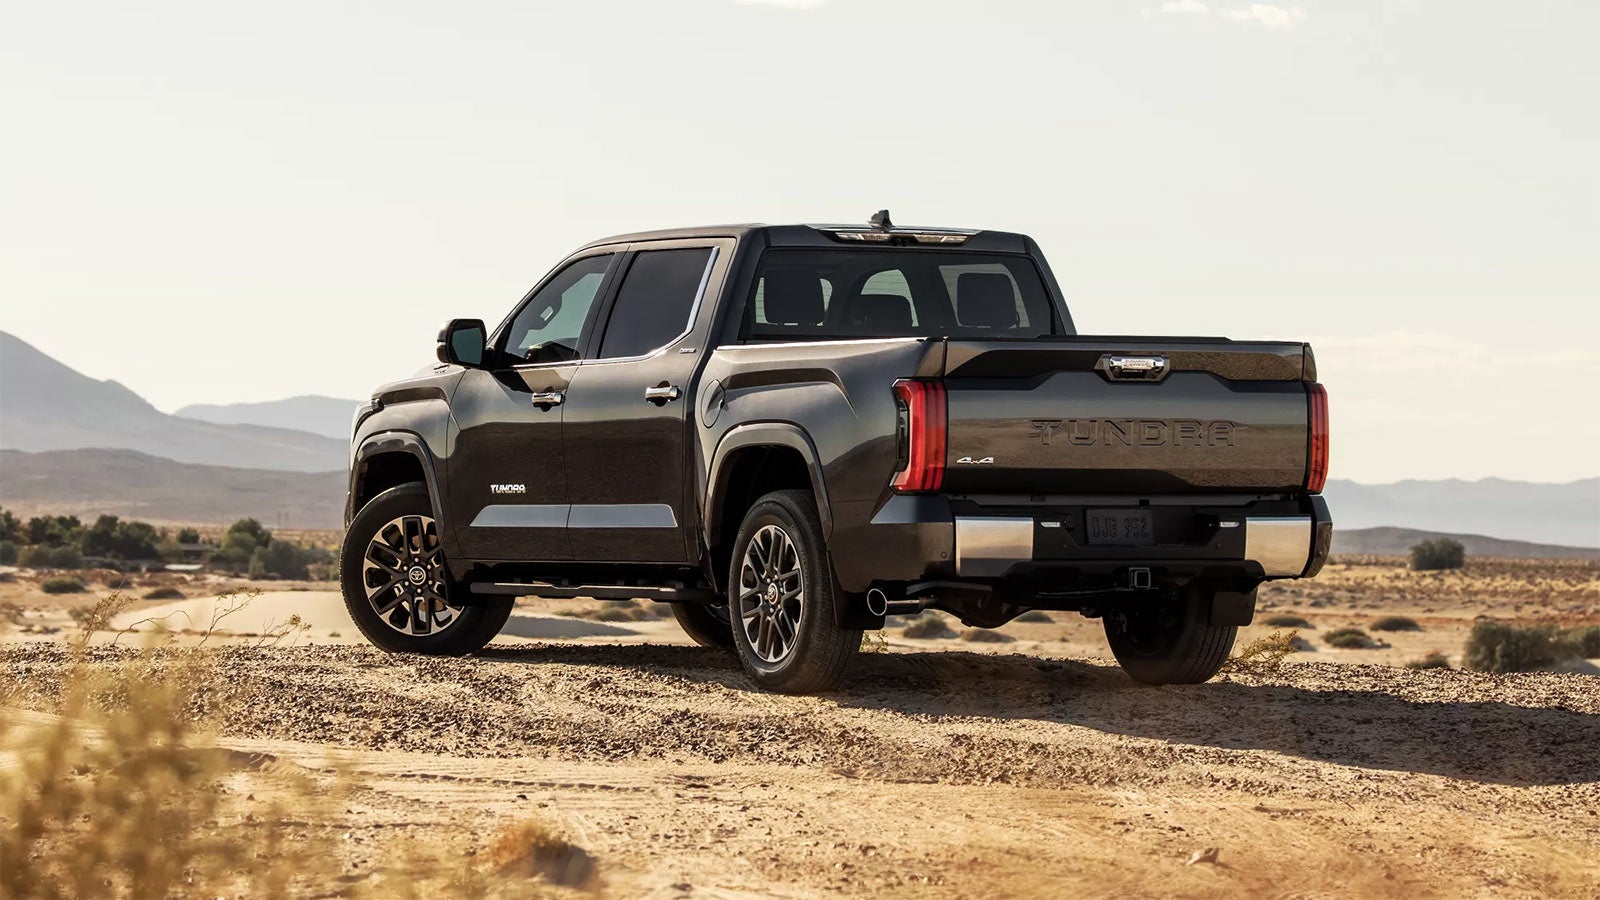 2022 Toyota Tundra Gallery | Fort Dodge Toyota in Fort Dodge IA